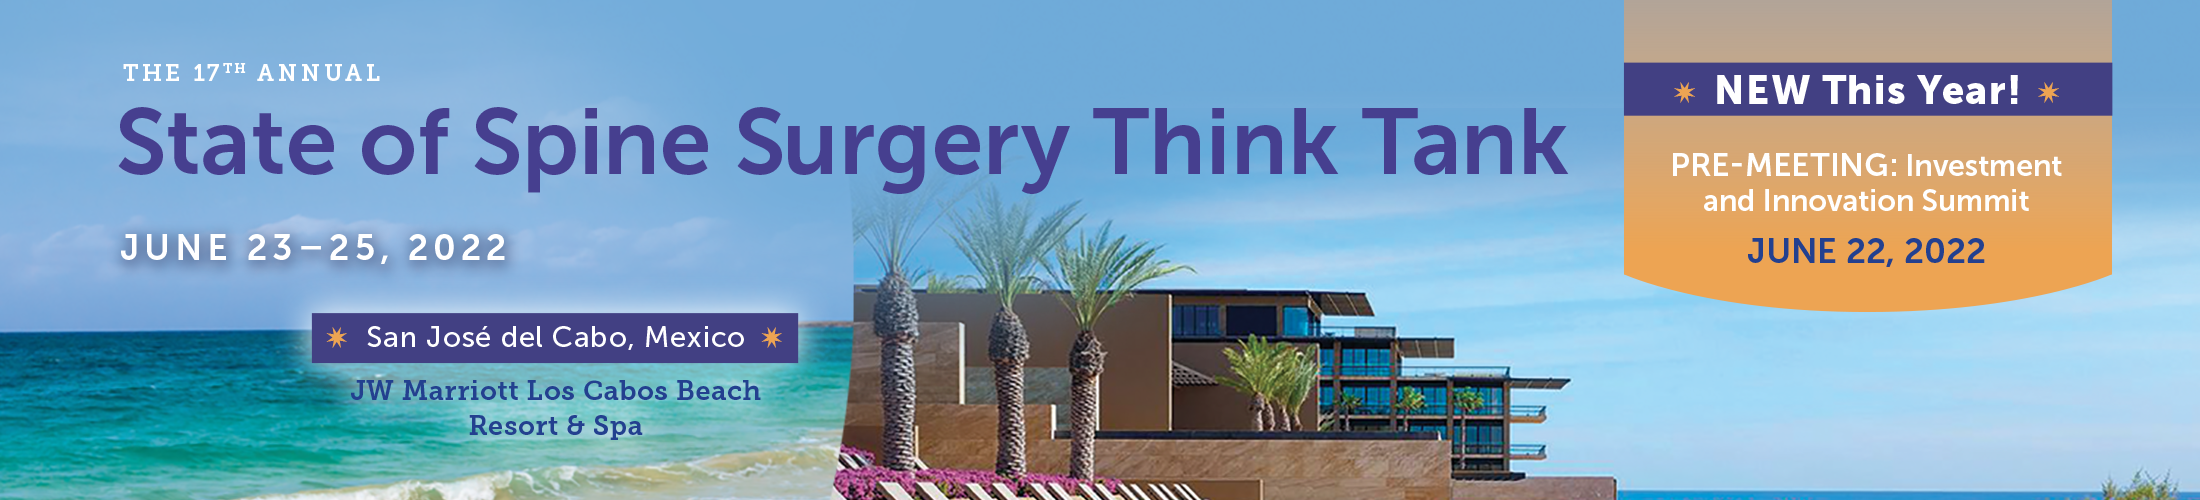 State of Spine Surgery Think Tank 2022